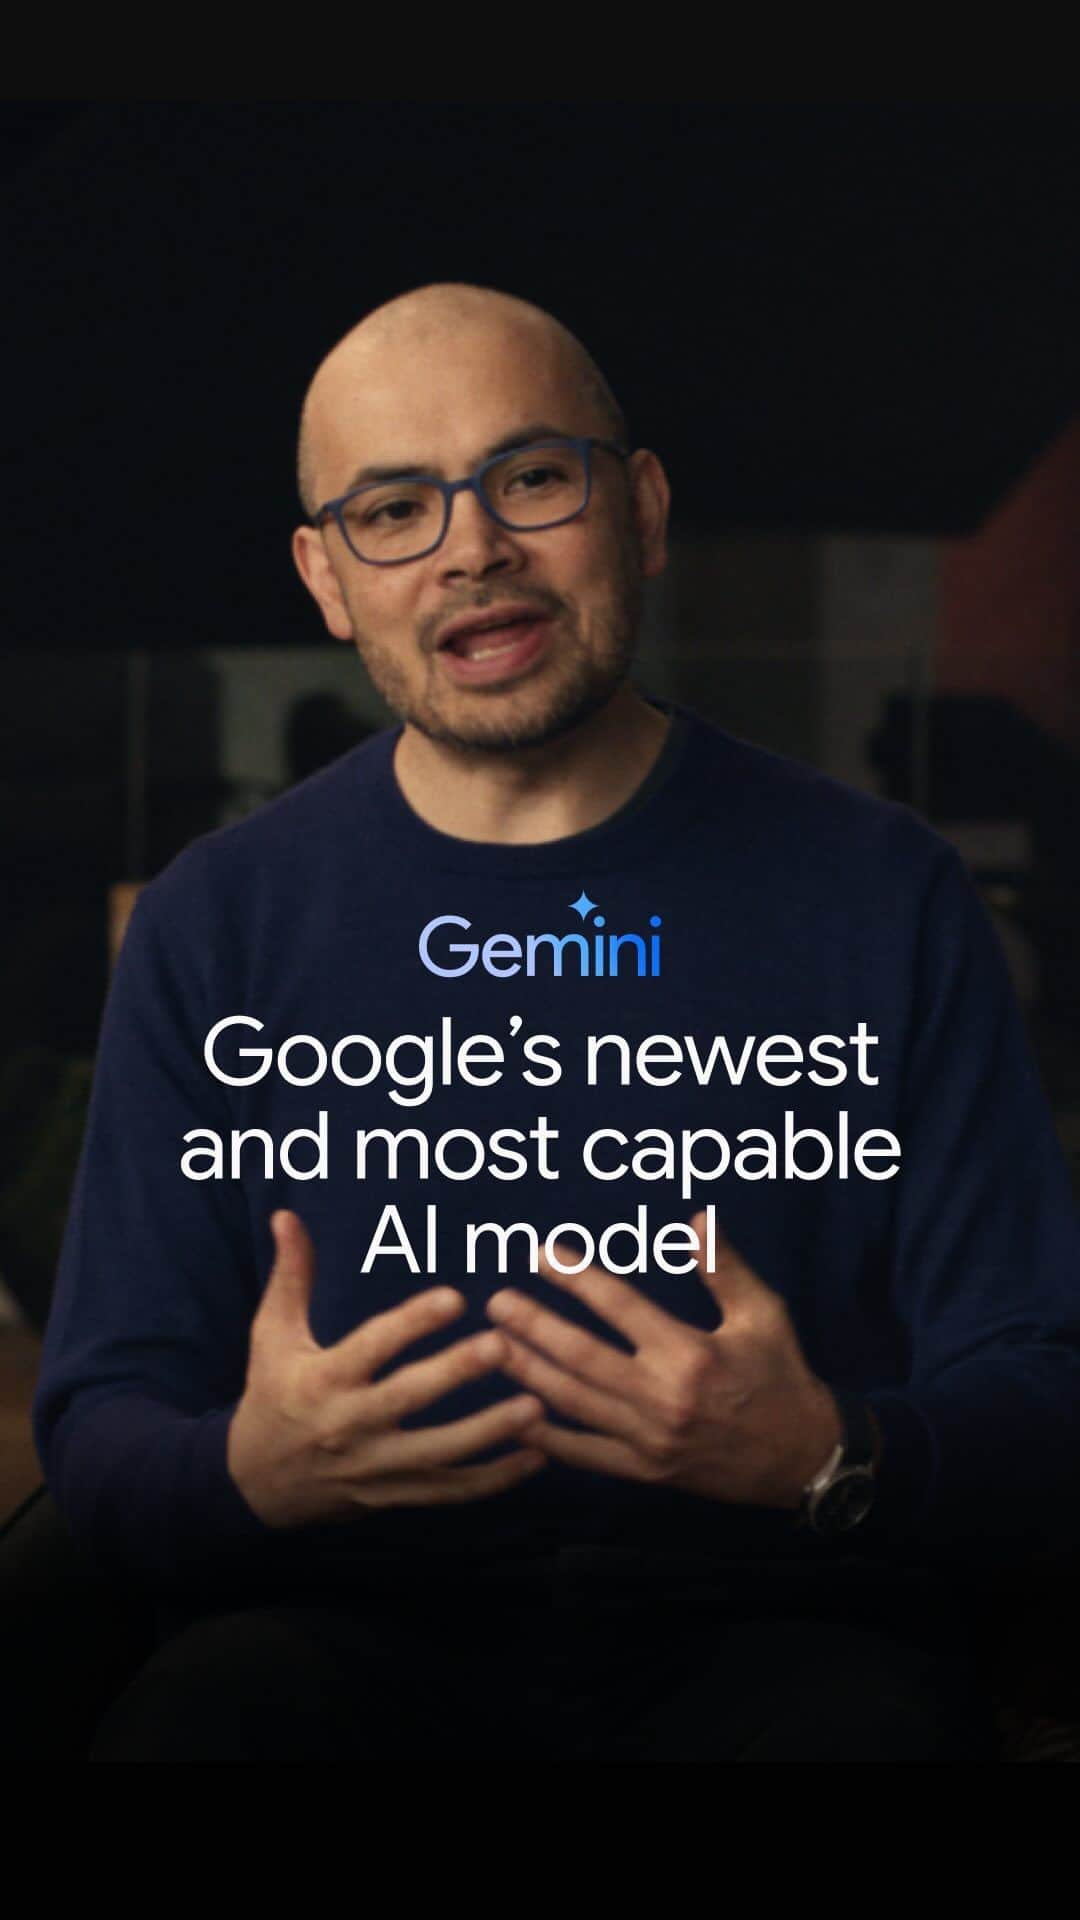 Googleのインスタグラム：「We’re excited to announce Gemini: @Google’s largest and most capable AI model.  Built to be natively multimodal, it can understand and operate across text, images, audio, video and code — and achieves state-of-the-art performance across many tasks.   Gemini comes in three sizes: Ultra, Pro and Nano - and is able to run on everything from mobile devices to data centers.  Tap the link in bio to find out more. #GeminiAI #BuildWithGemini」